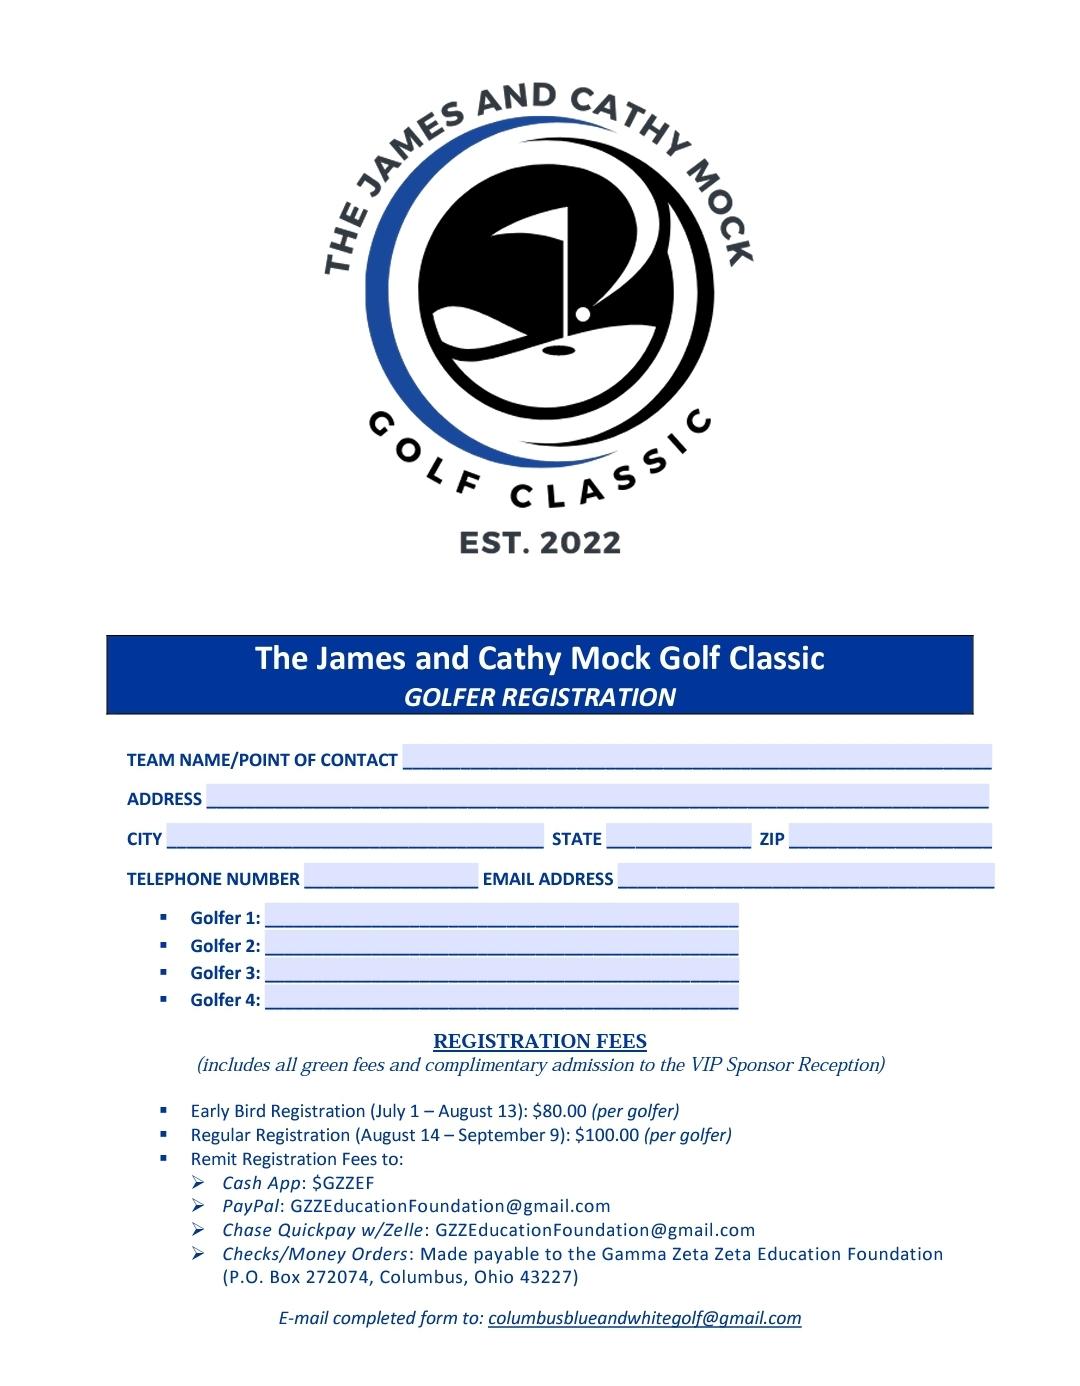 The Second Annual James and Cathy Mock Golf Classic